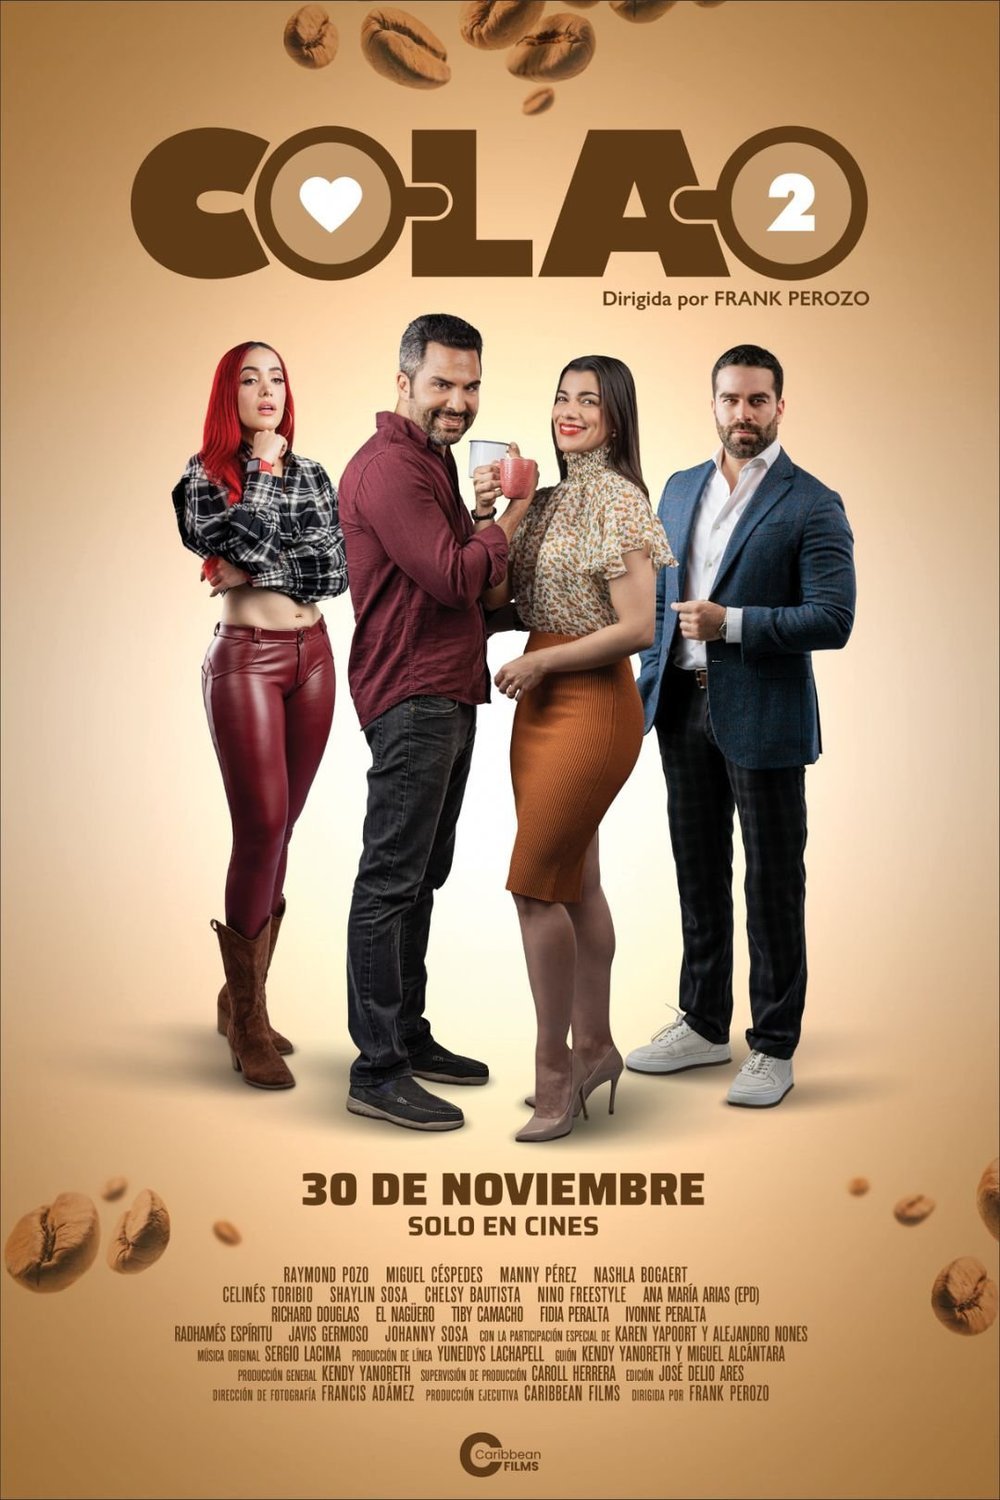 Spanish poster of the movie Colao 2